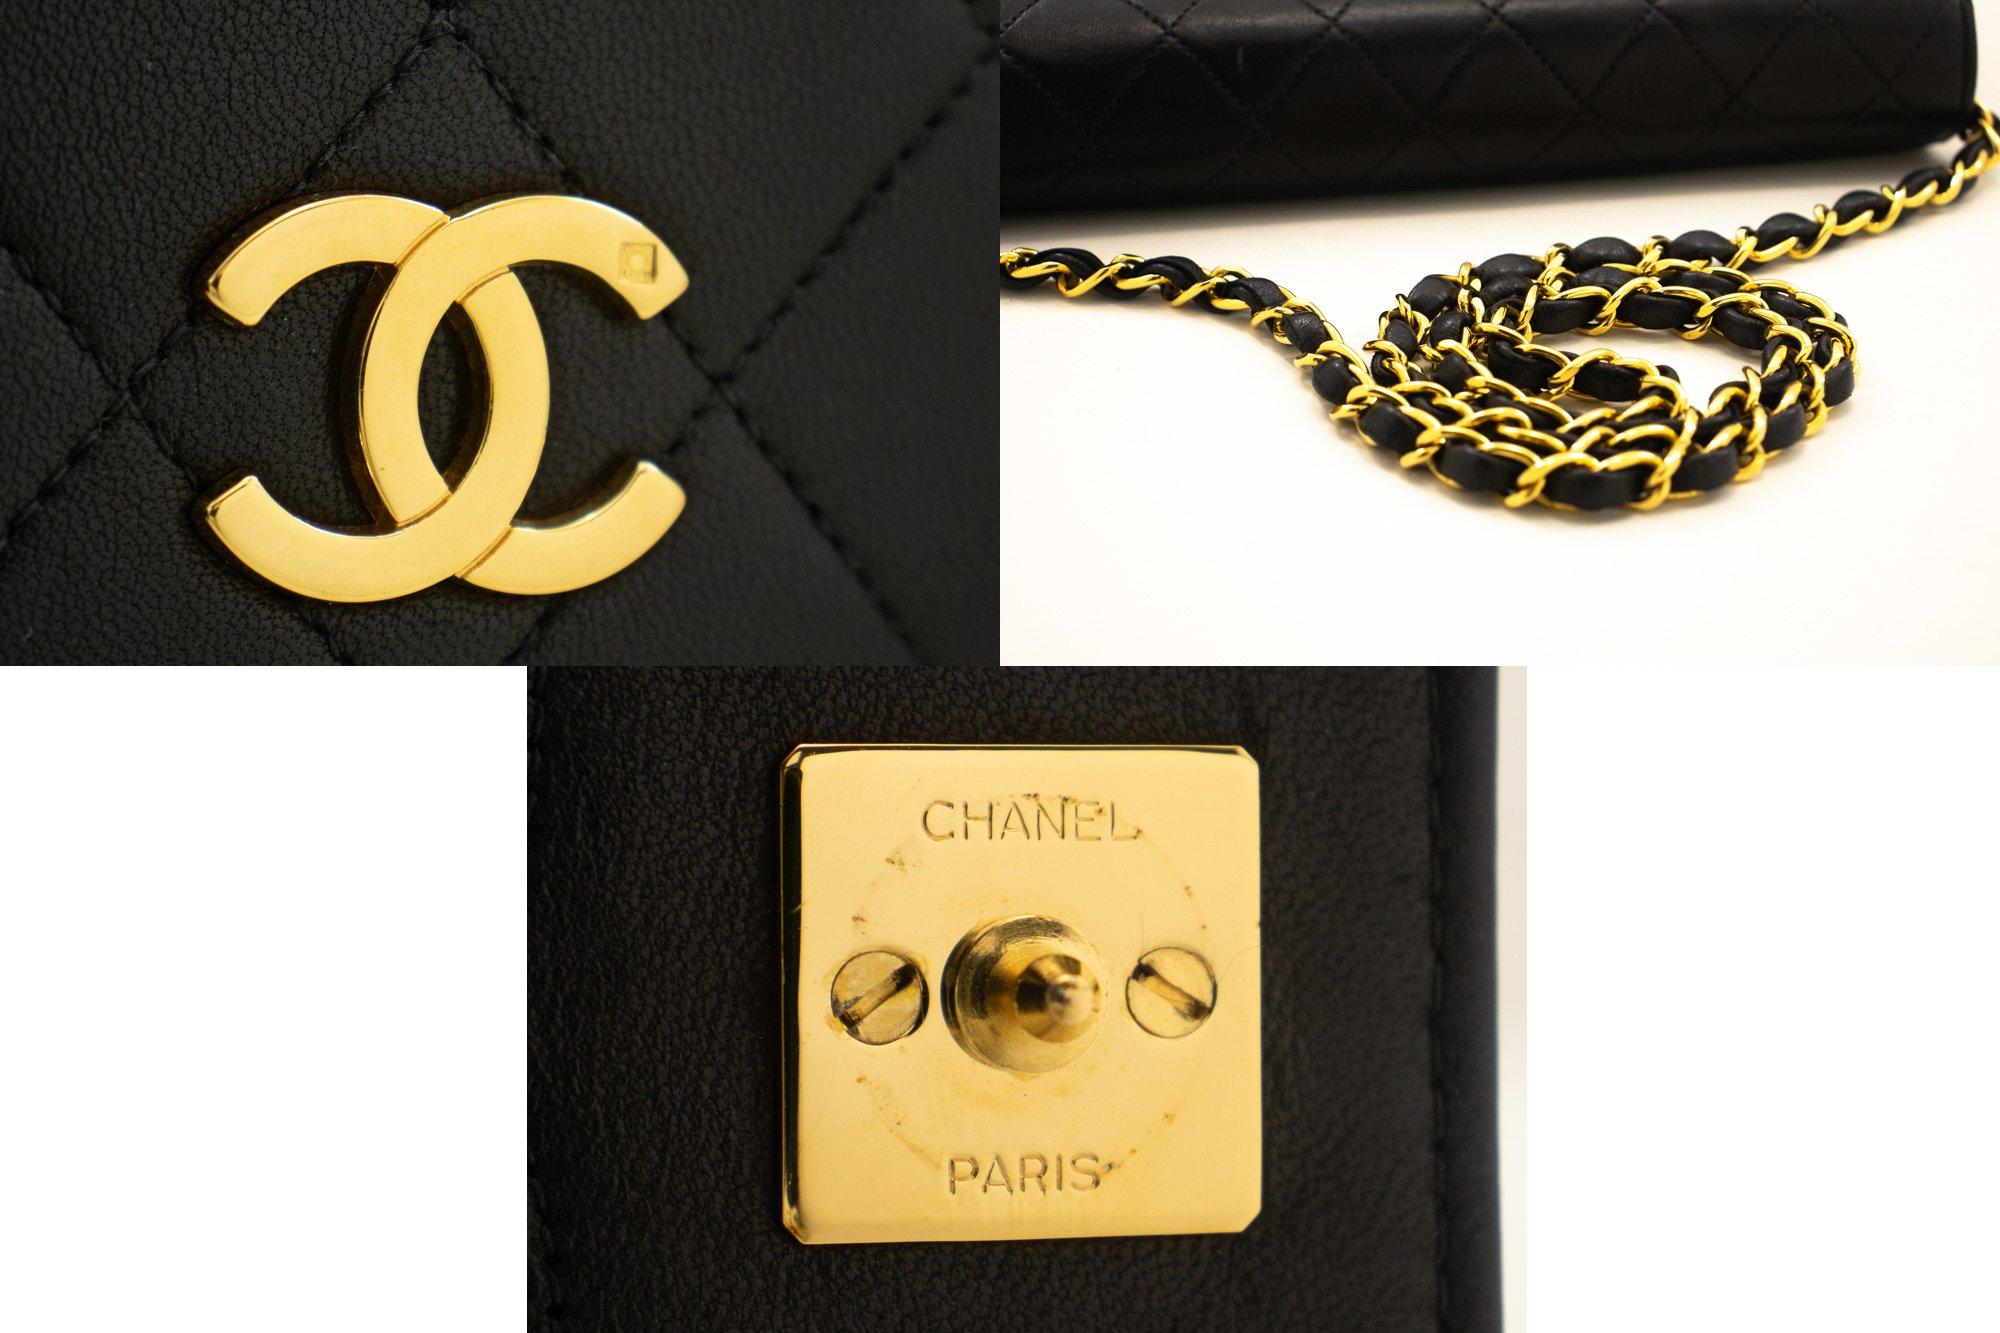 CHANEL Full Chain Flap Shoulder Bag Black Clutch Quilted Lambskin For Sale 3